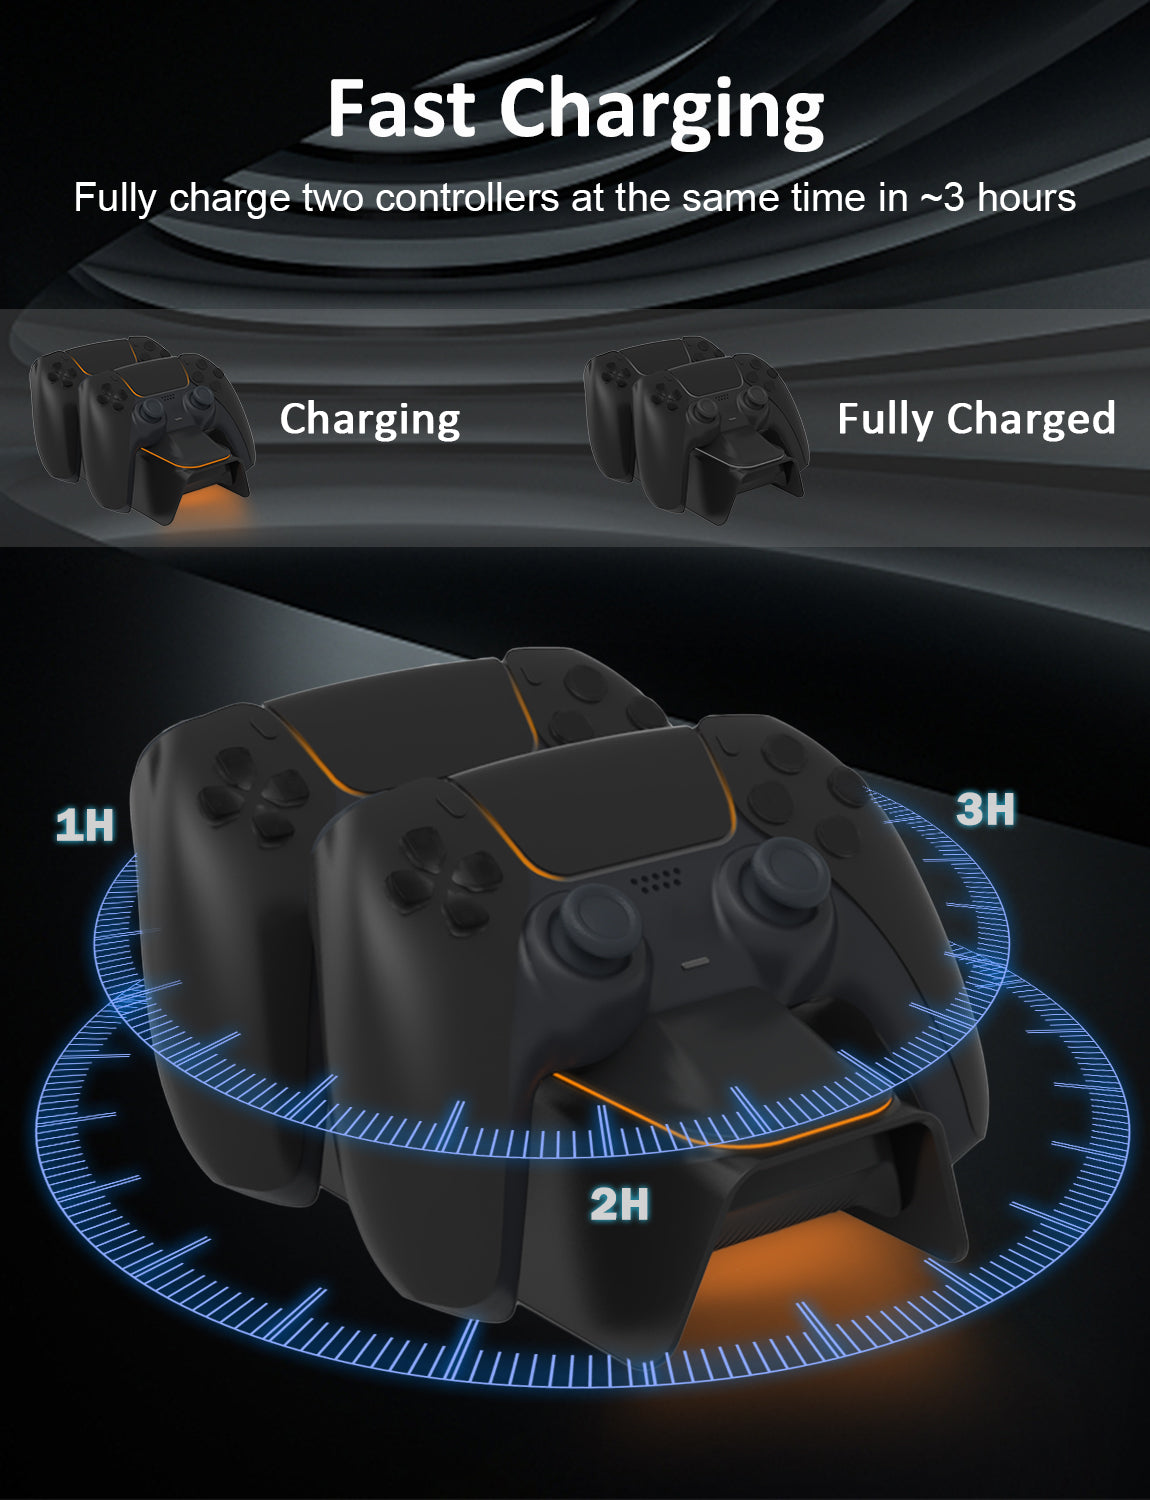 Shows the state of controller charging, full charge two controllers at the same time in ~3 hours.